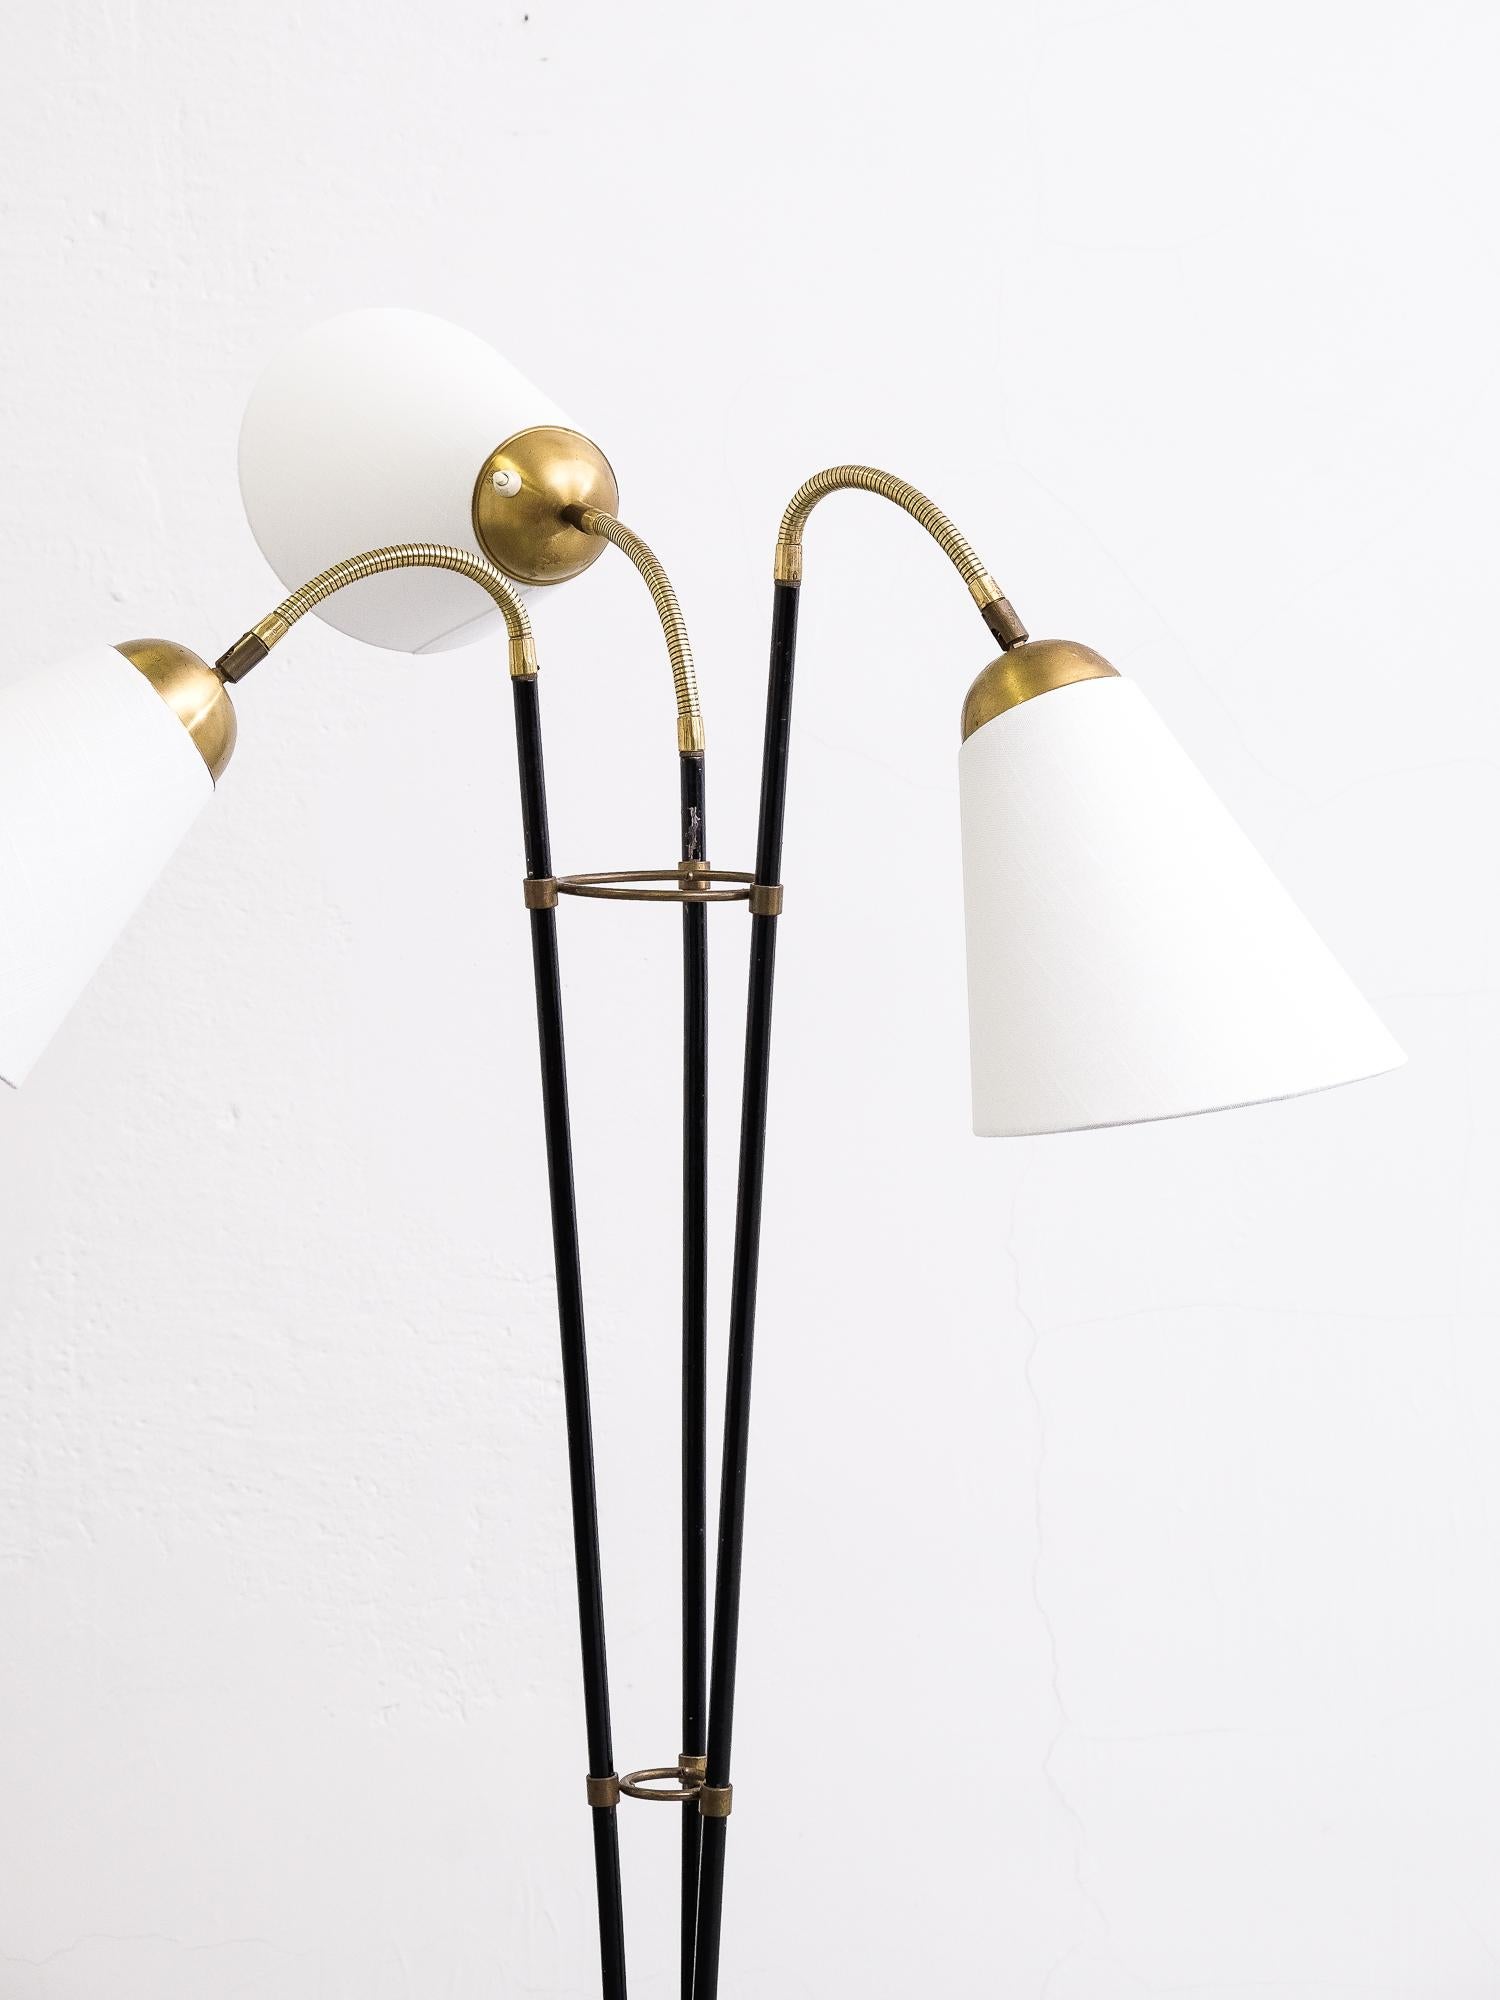 A black enamelled iron and brass three-arm floor lamp, with new offwhite fabric shades.
Manufactured in Sweden, 1950s.